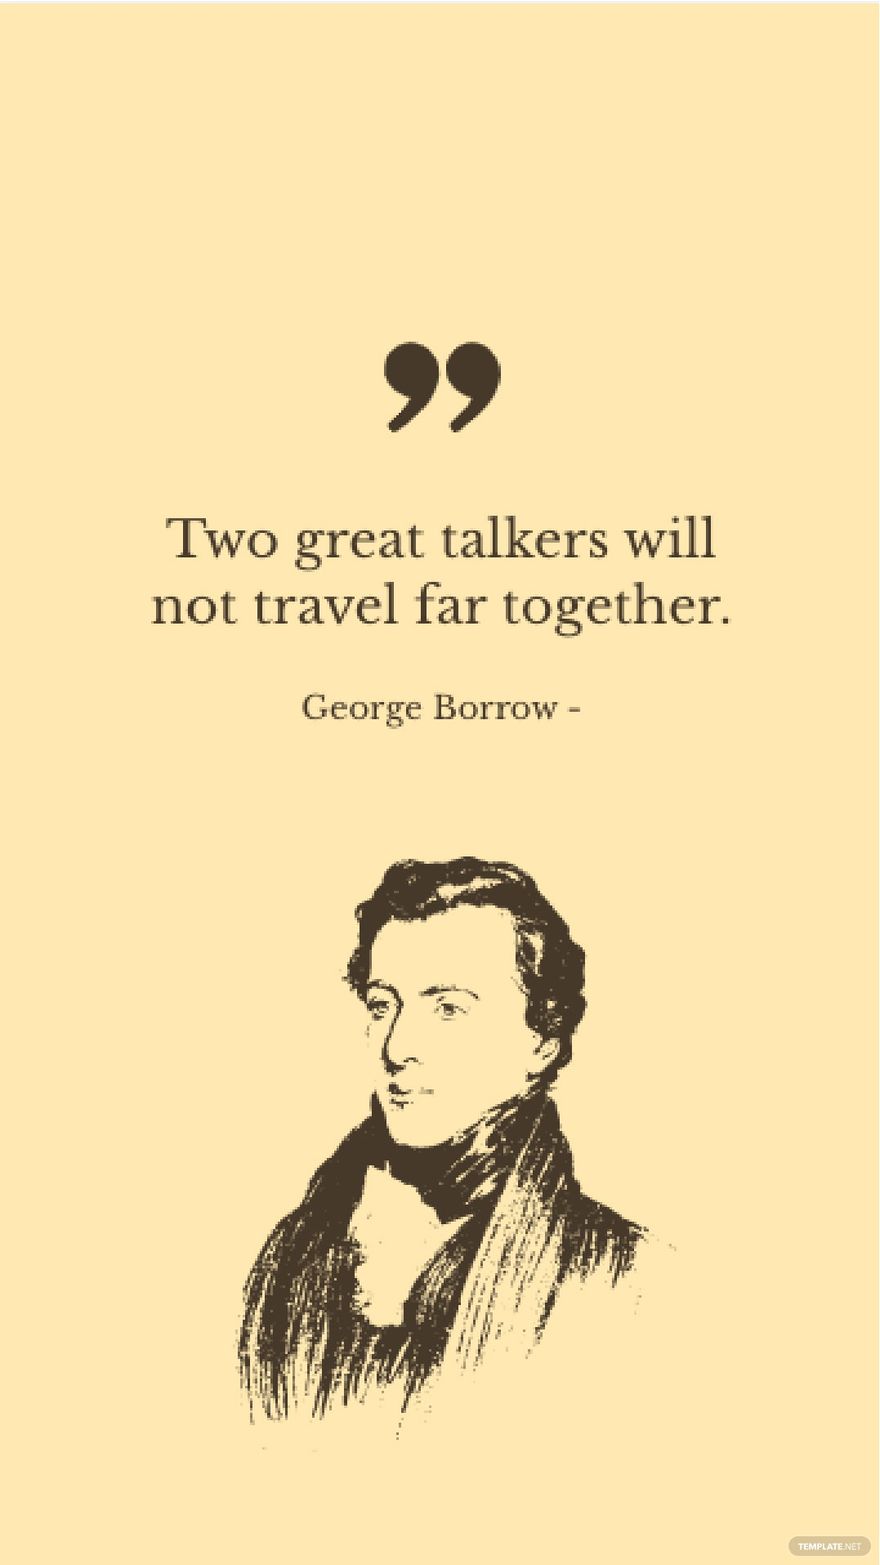 Free George Borrow - Two great talkers will not travel far together. in JPG